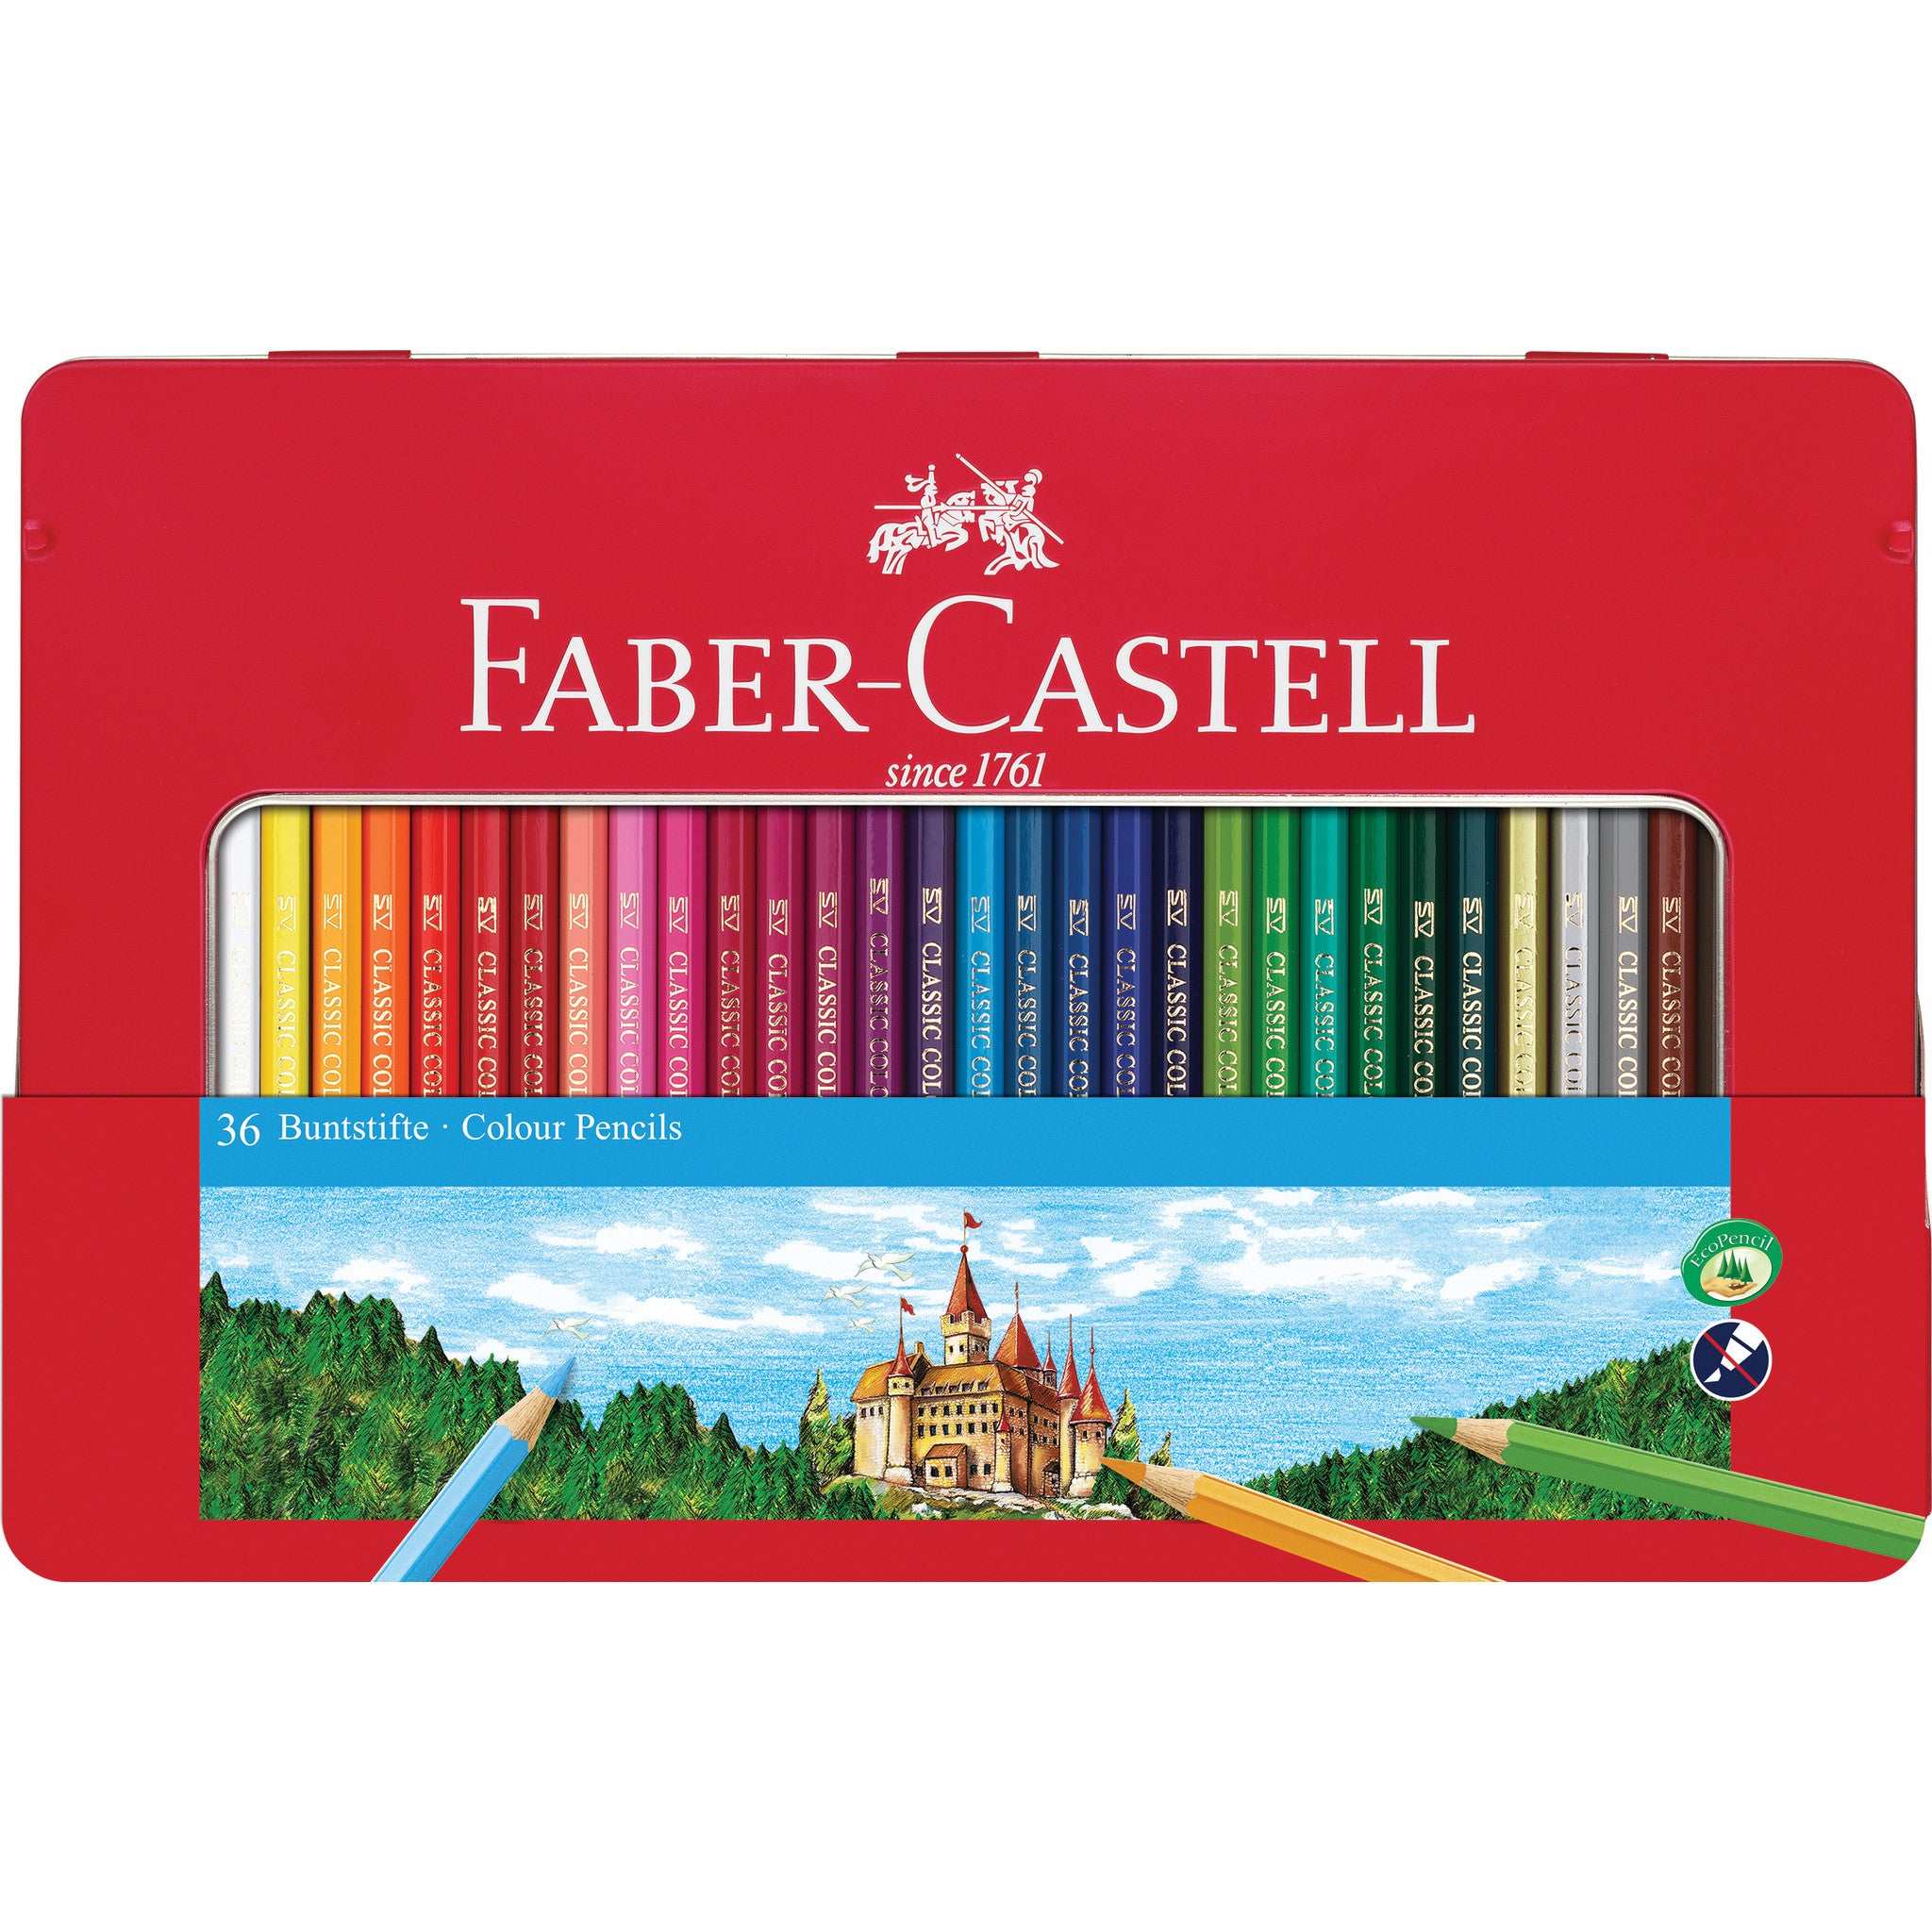 Faber Castell - 36 Classic Colored Pencils Gift Set